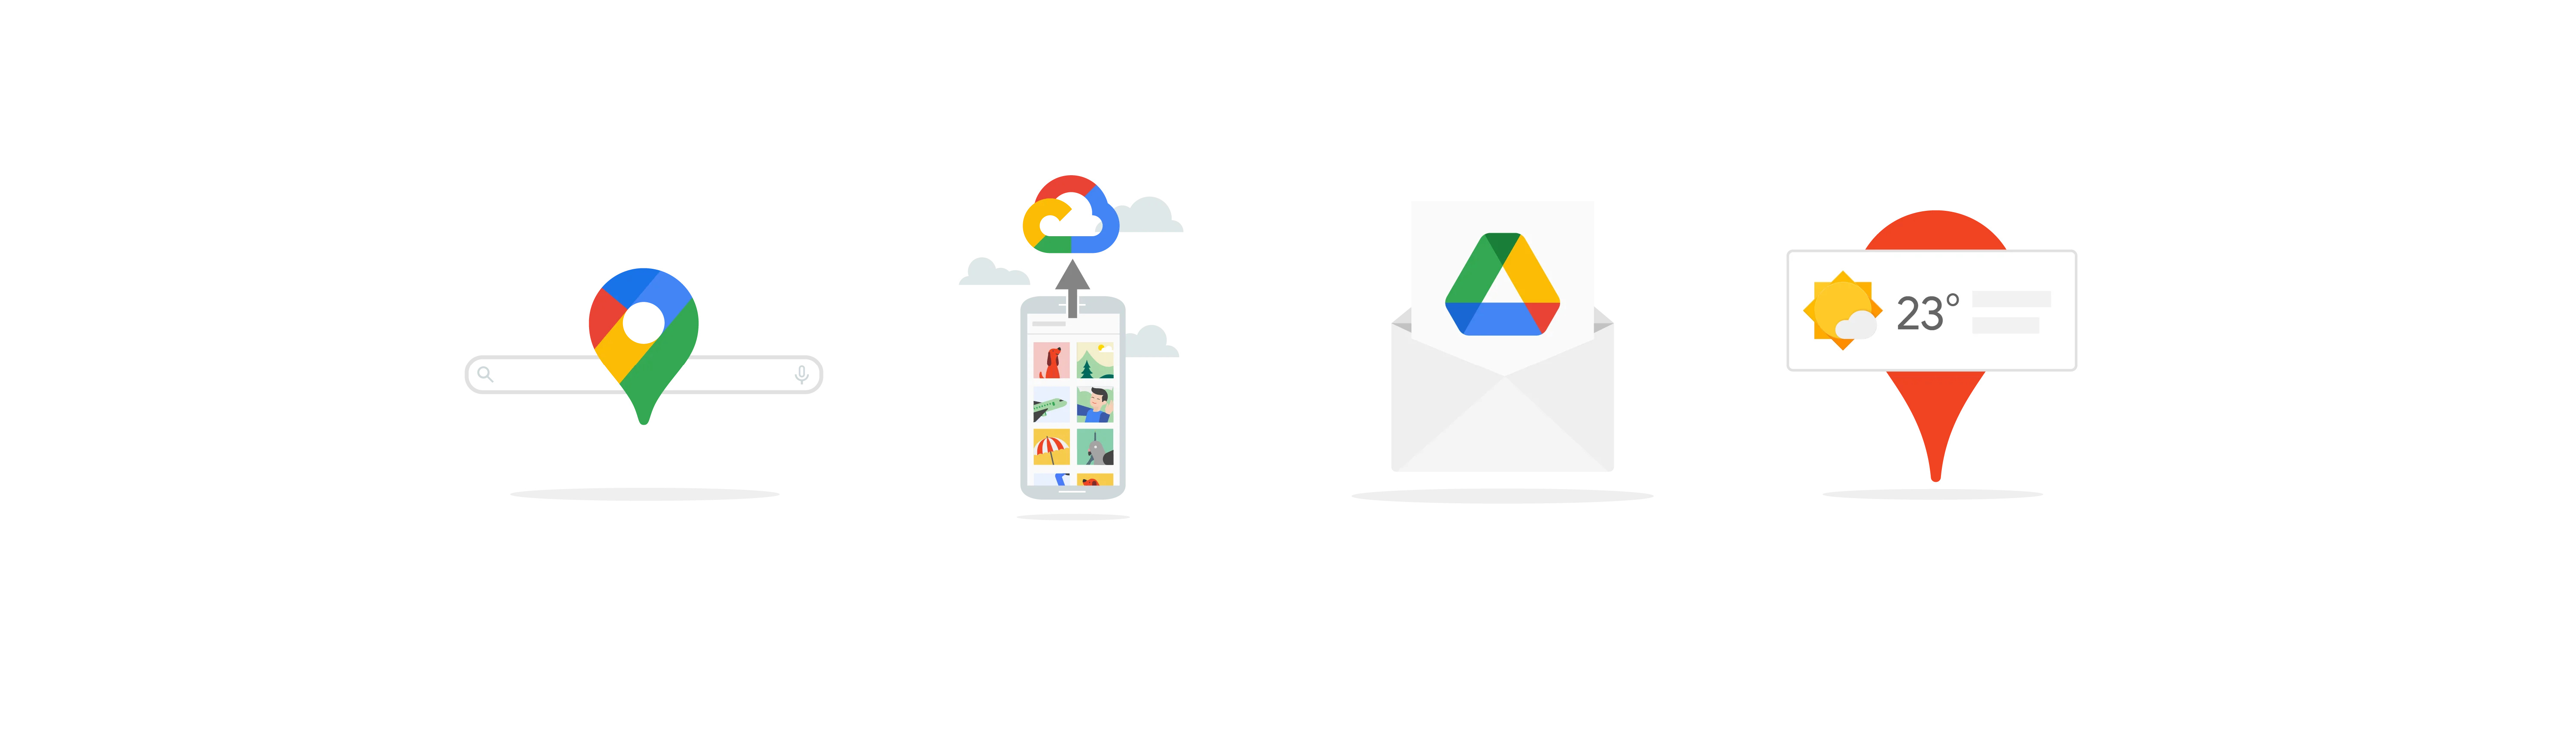 Four illustrations showing: the Google Maps logo on a search box, a mobile phone displaying photos and a Google Cloud icon (representing uploading to the cloud), an envelope open to show a piece of paper with the Google Drive icon, and a location pin with